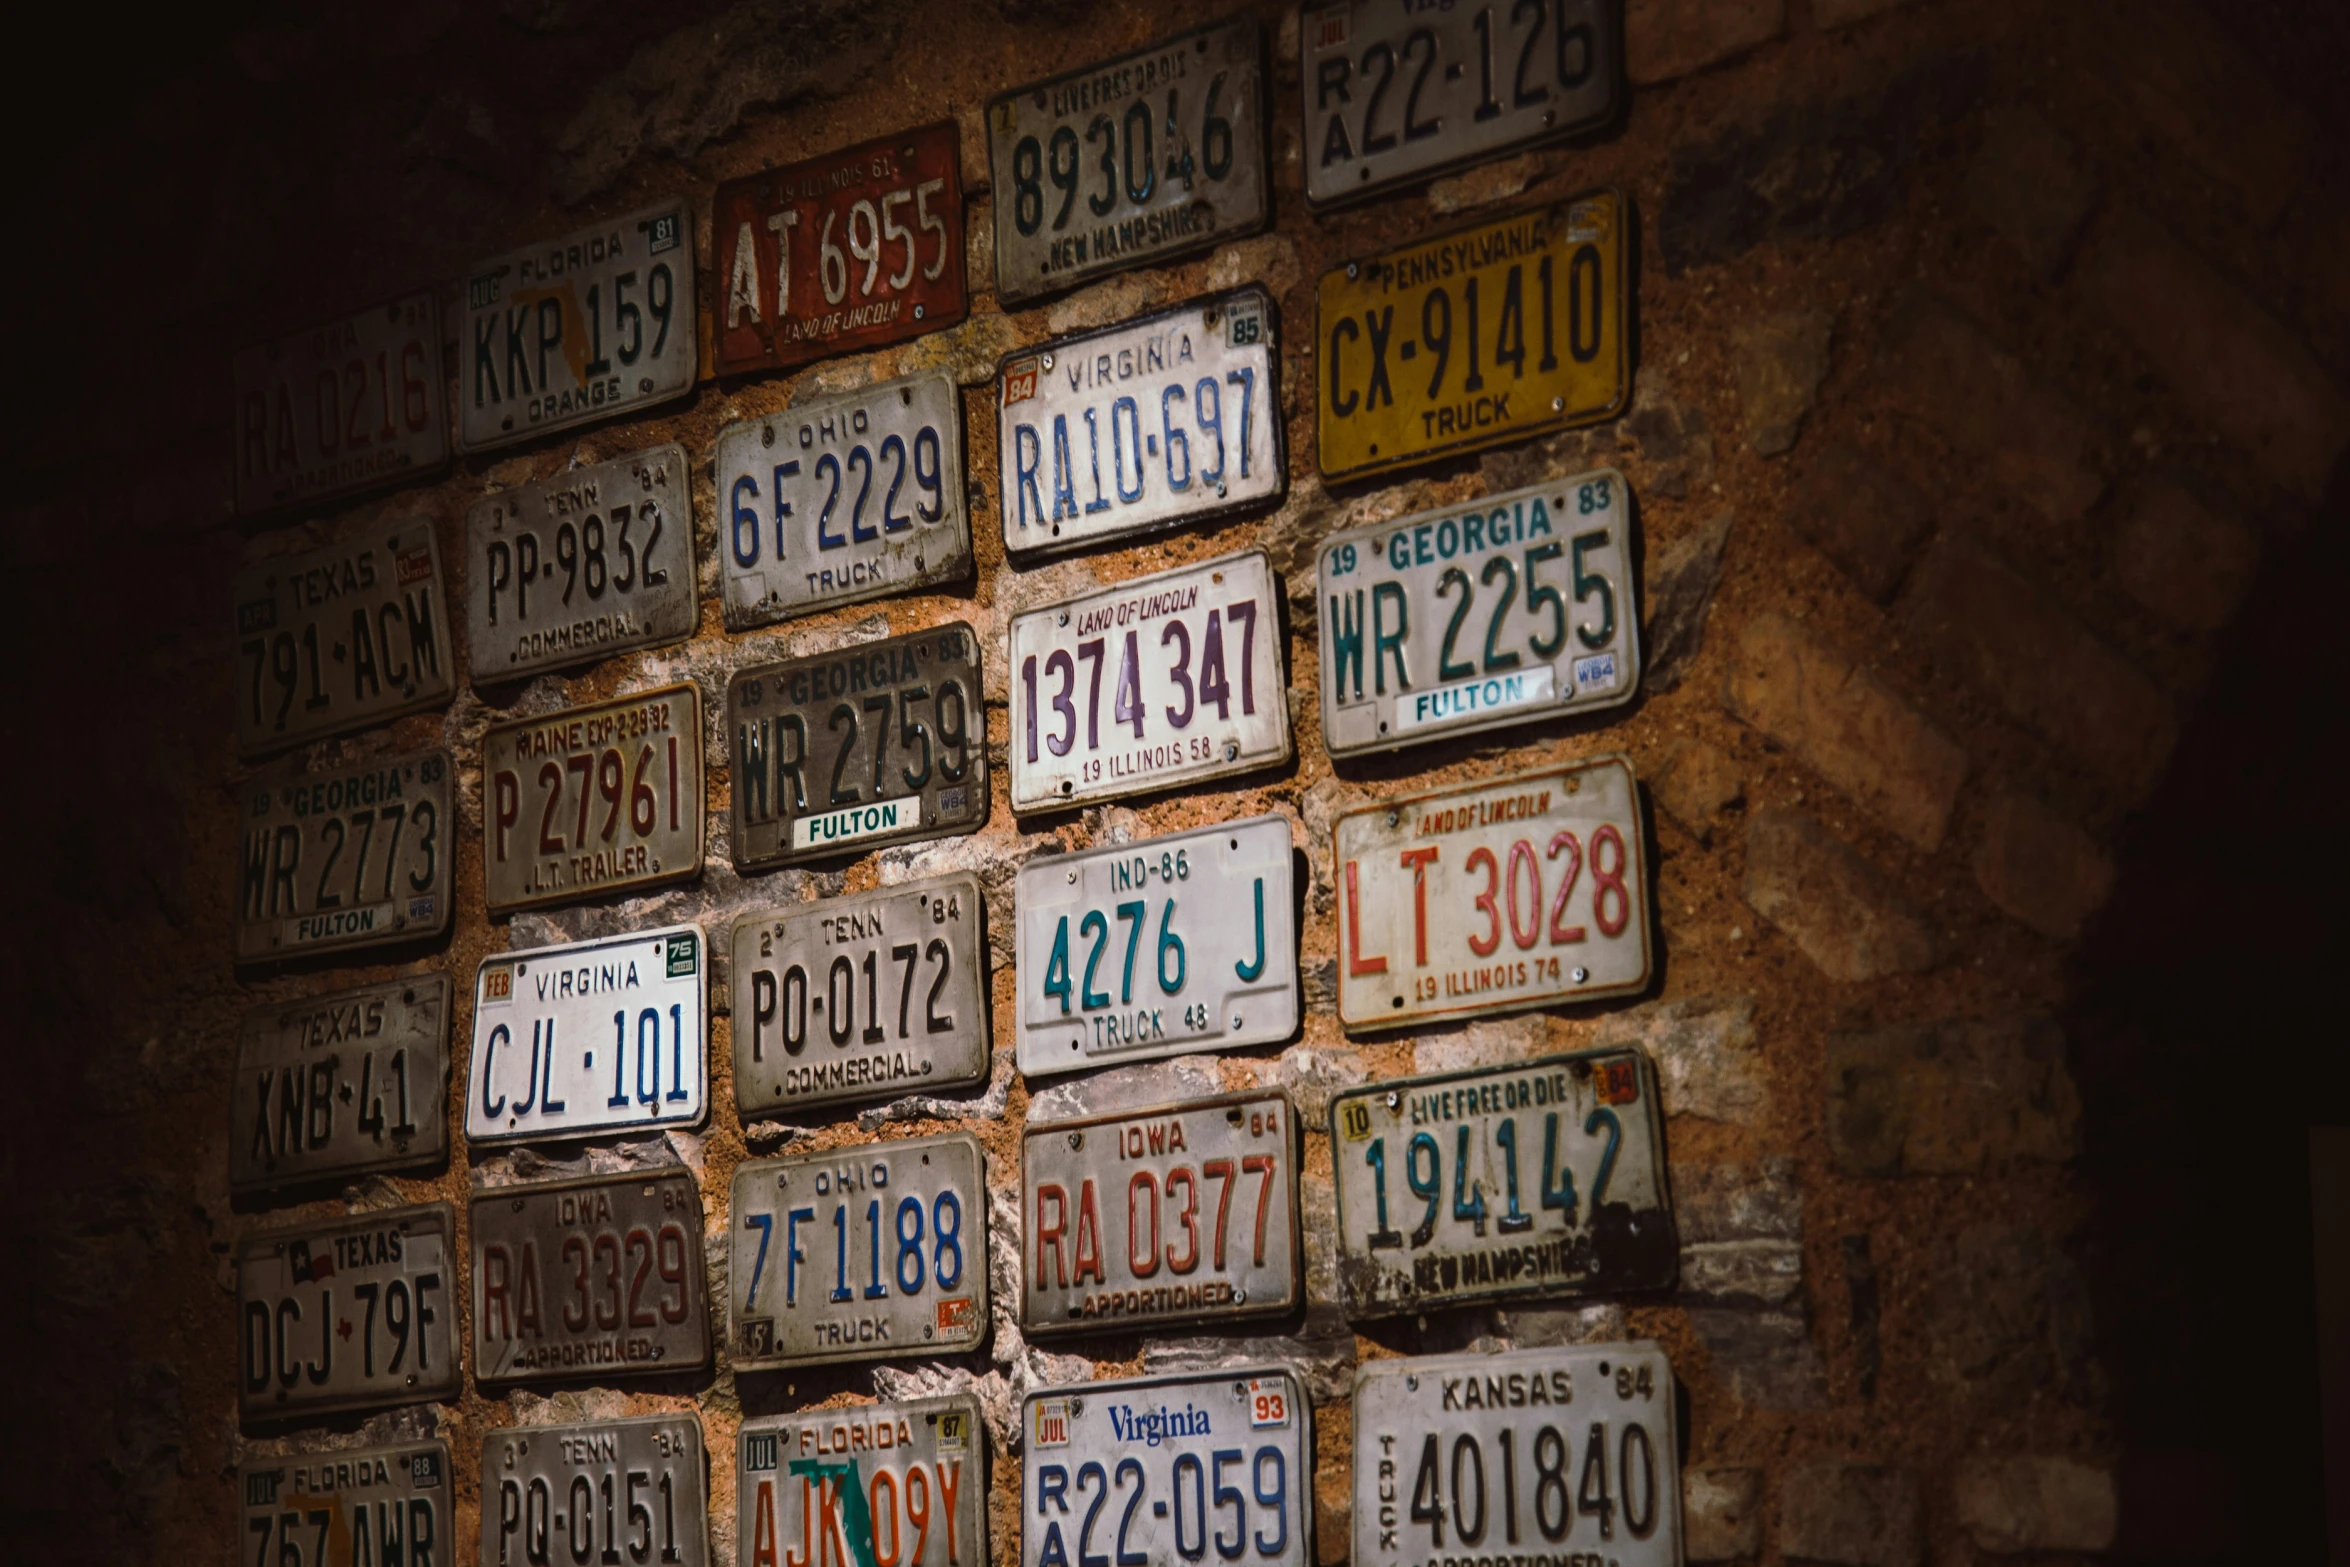 a group of license plates on display in a stone wall